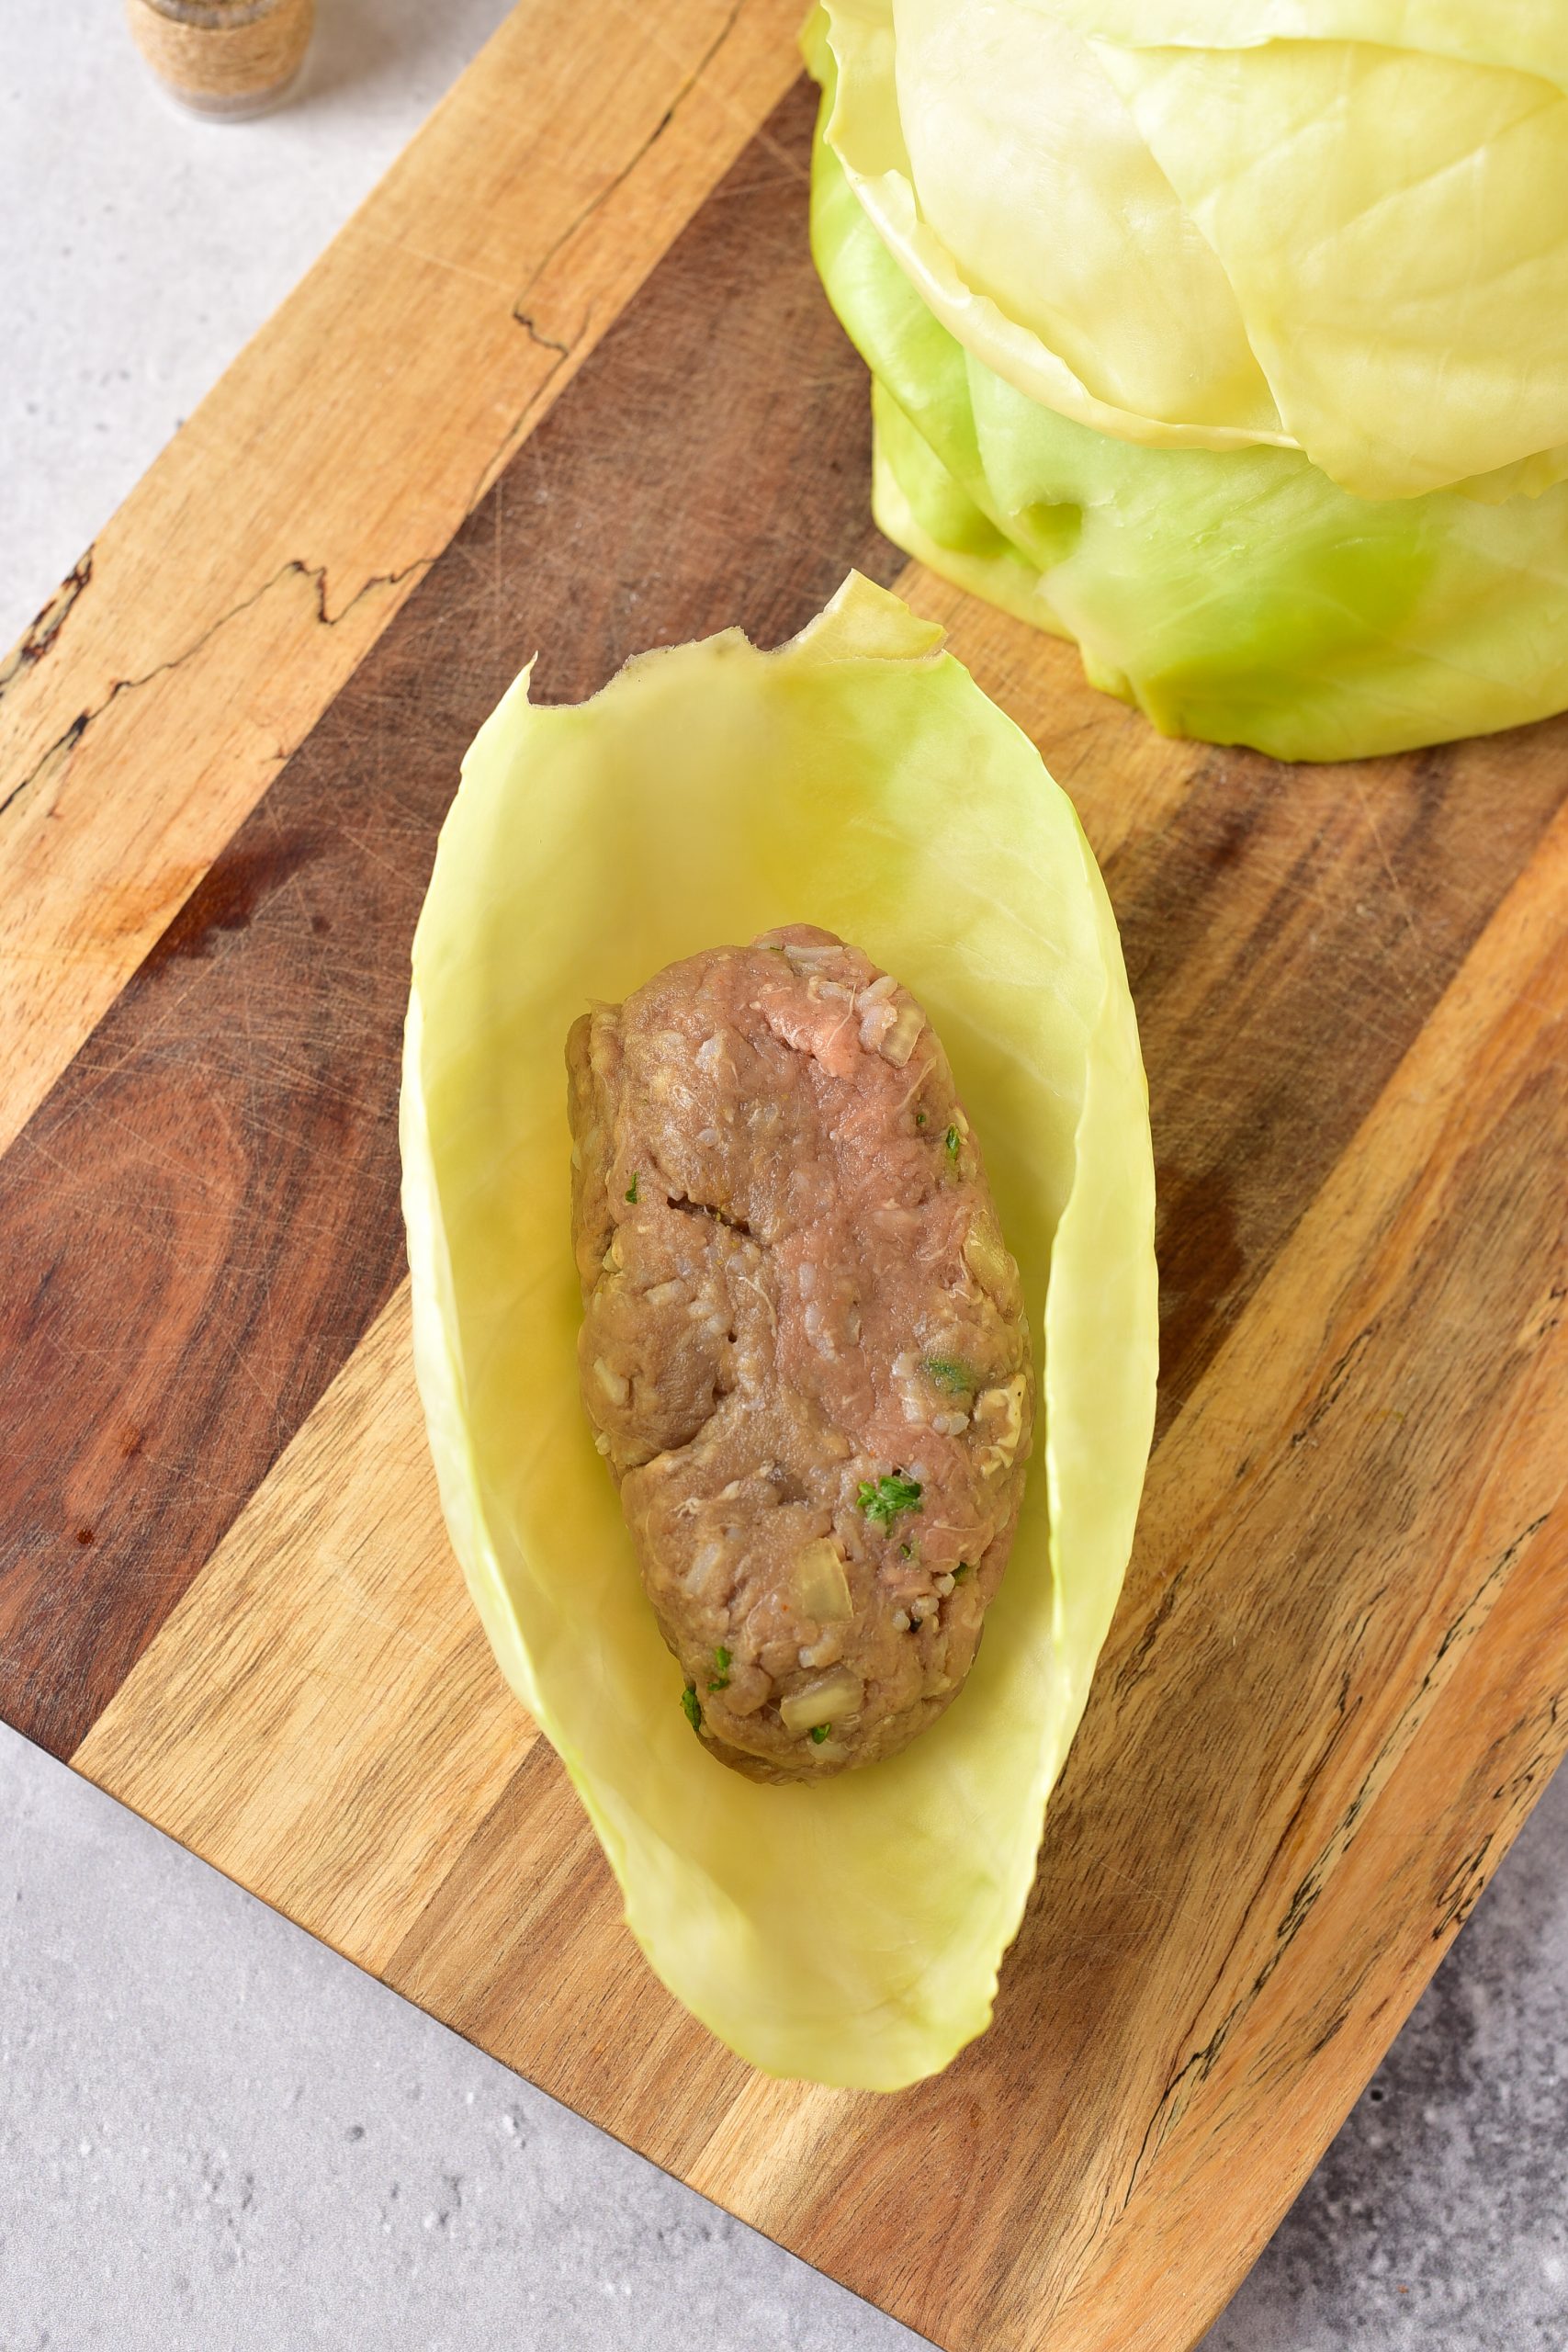 Form the meat mixture into 12 evenly sized balls, and place each one into the center of a cabbage leaf. 